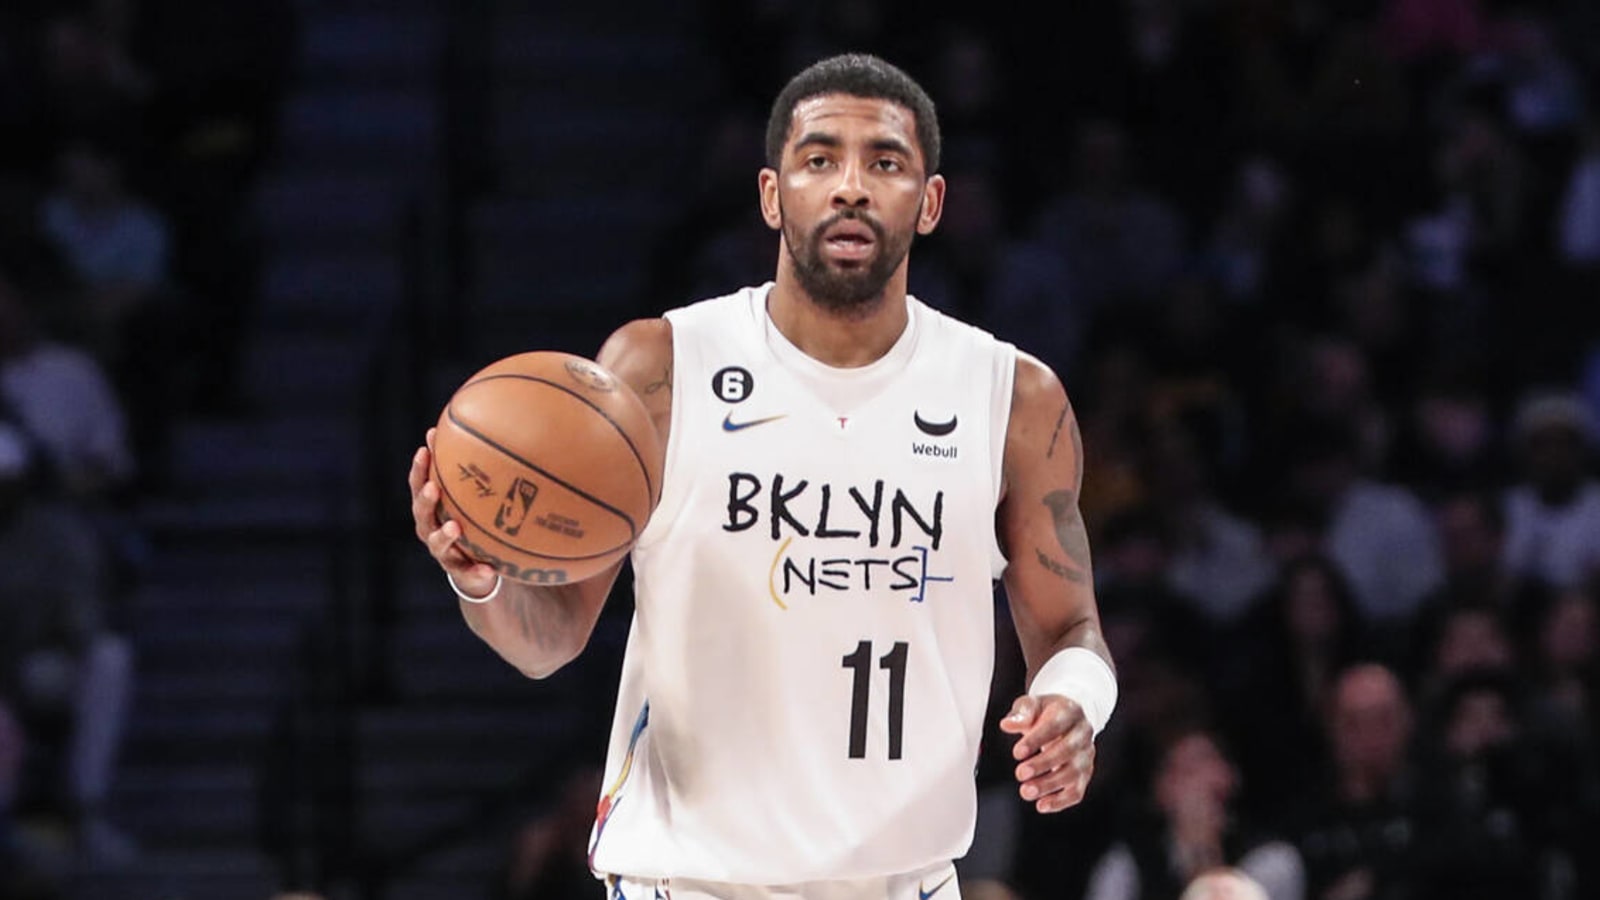 Magic Johnson wants Nets’ disgruntled star Kyrie Irving in Lakers